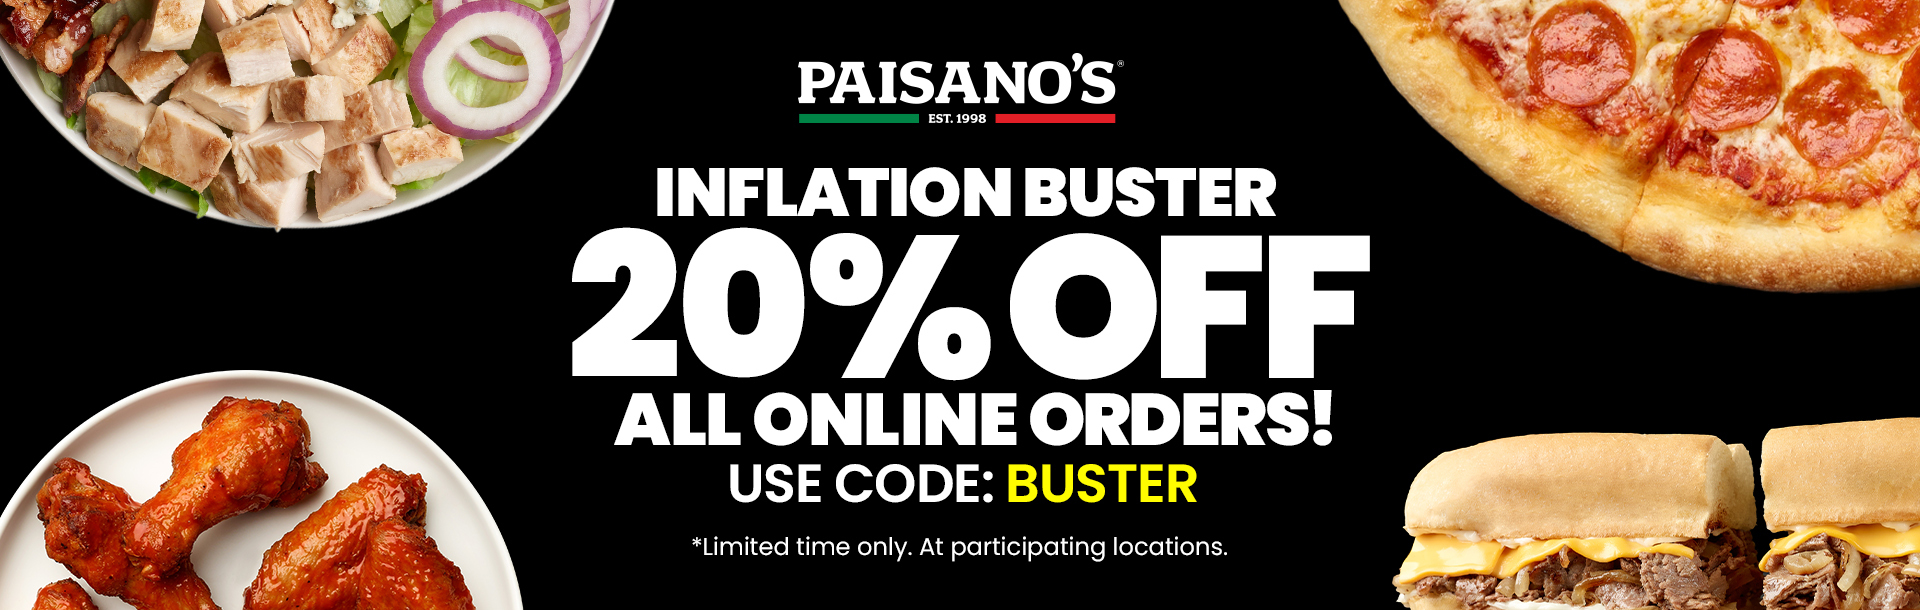 Paisanos_Webbanner_InflationBuster_1920x610_Aug25